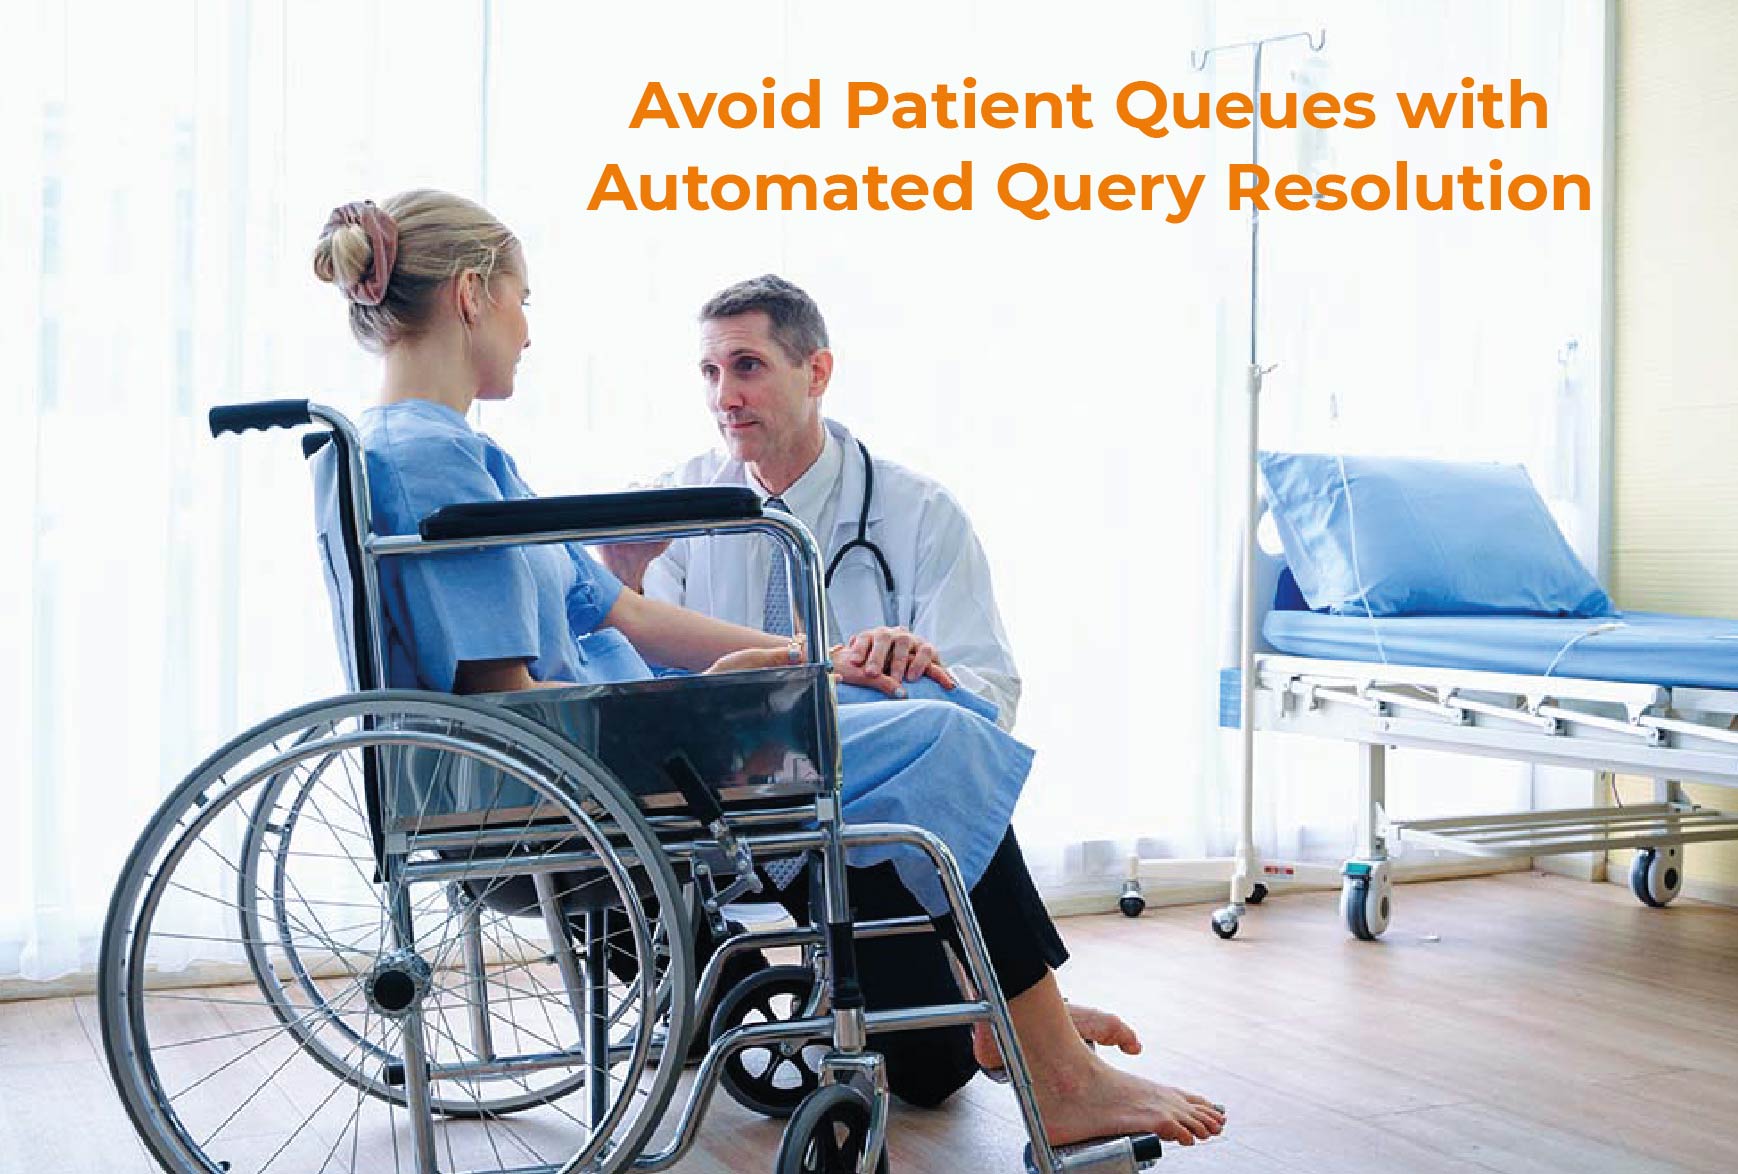 Avoid Patient Queues with Automated Query Resolution